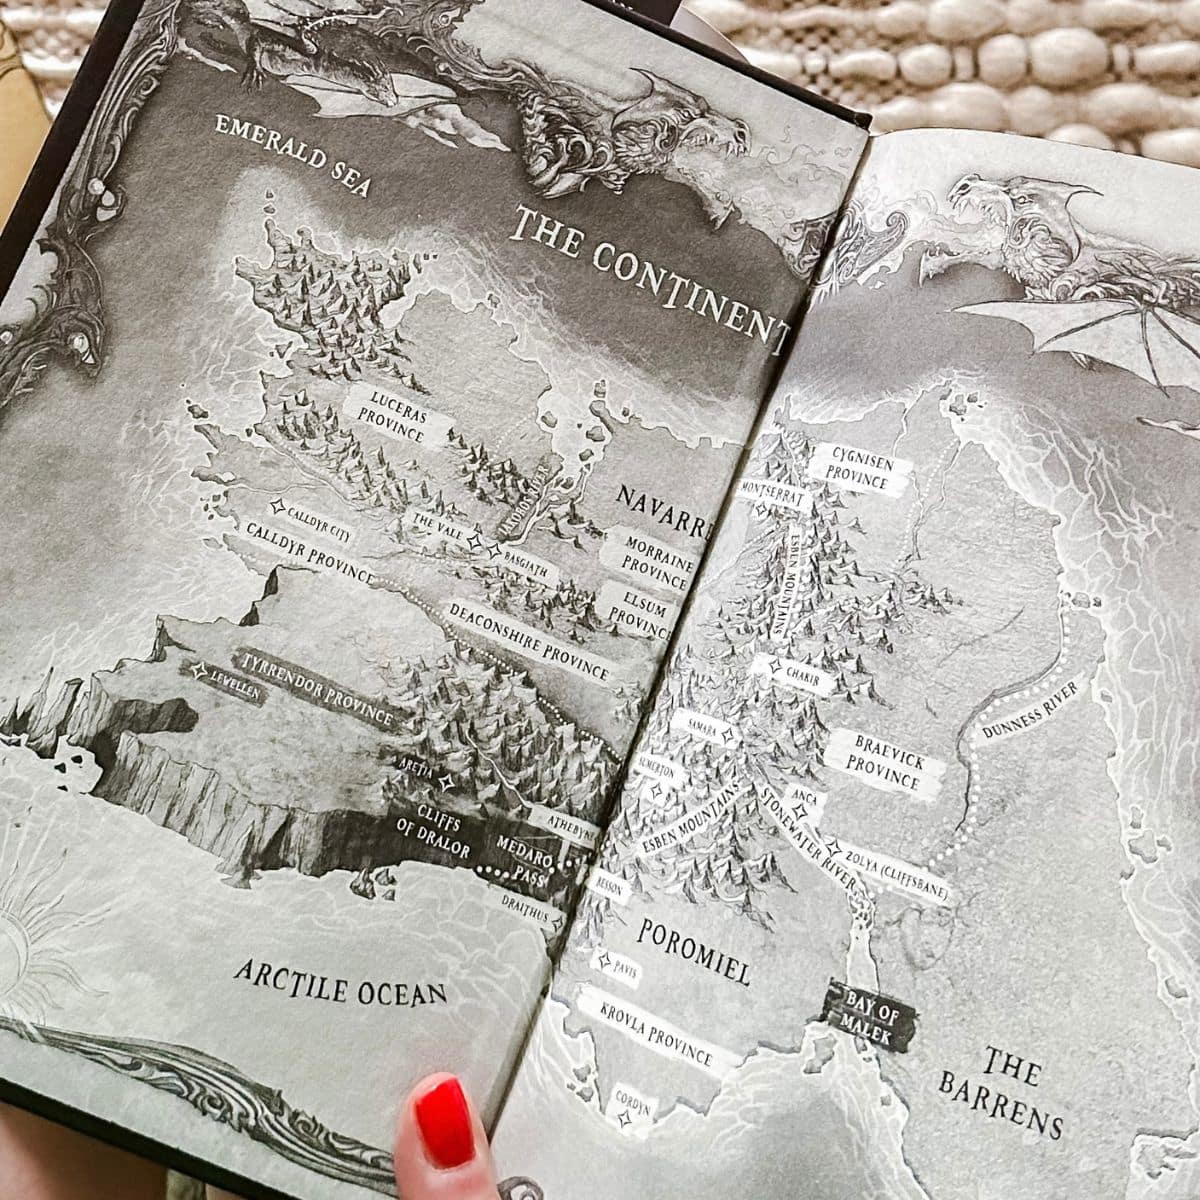 closeup of iron flame map inside the book covers.